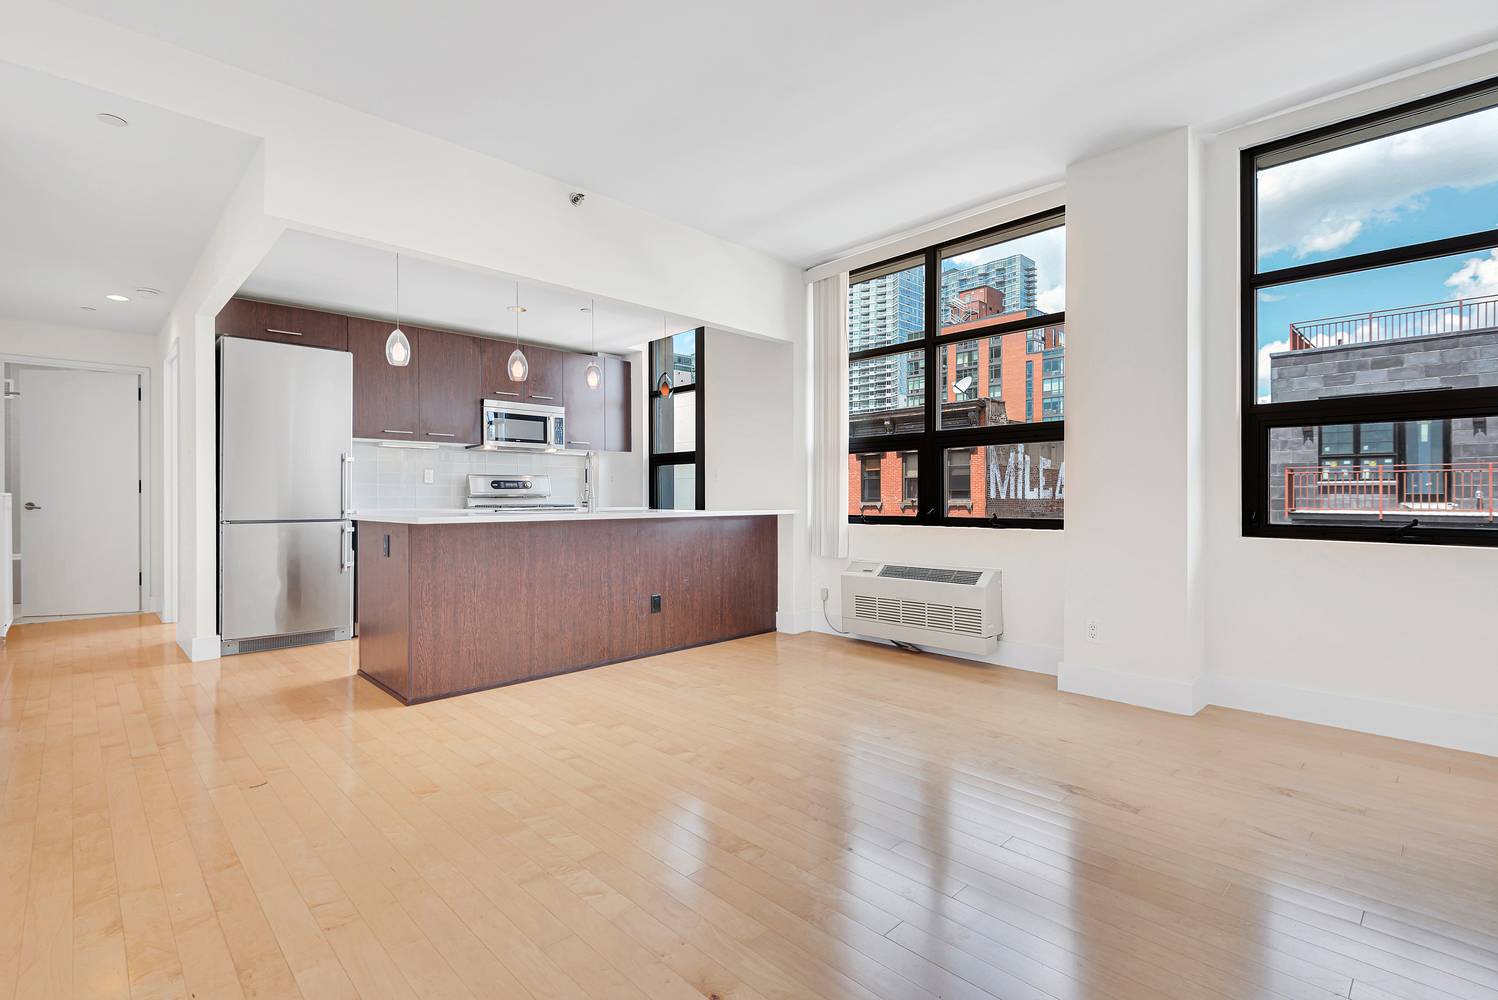 Excellent large one bedroom, full bathroom unit with full size modern kitchen located a couple of blocks from the waterfront and a few blocks from the 7 train.